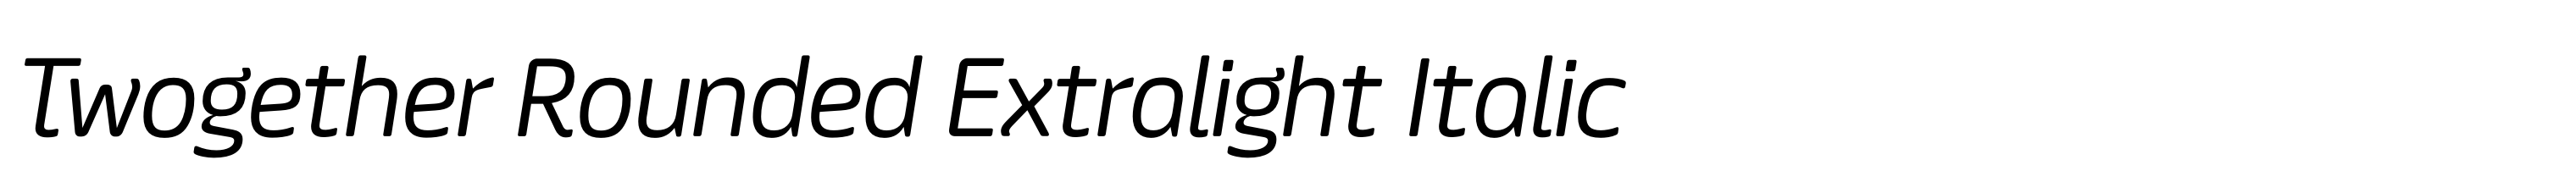 Twogether Rounded Extralight Italic